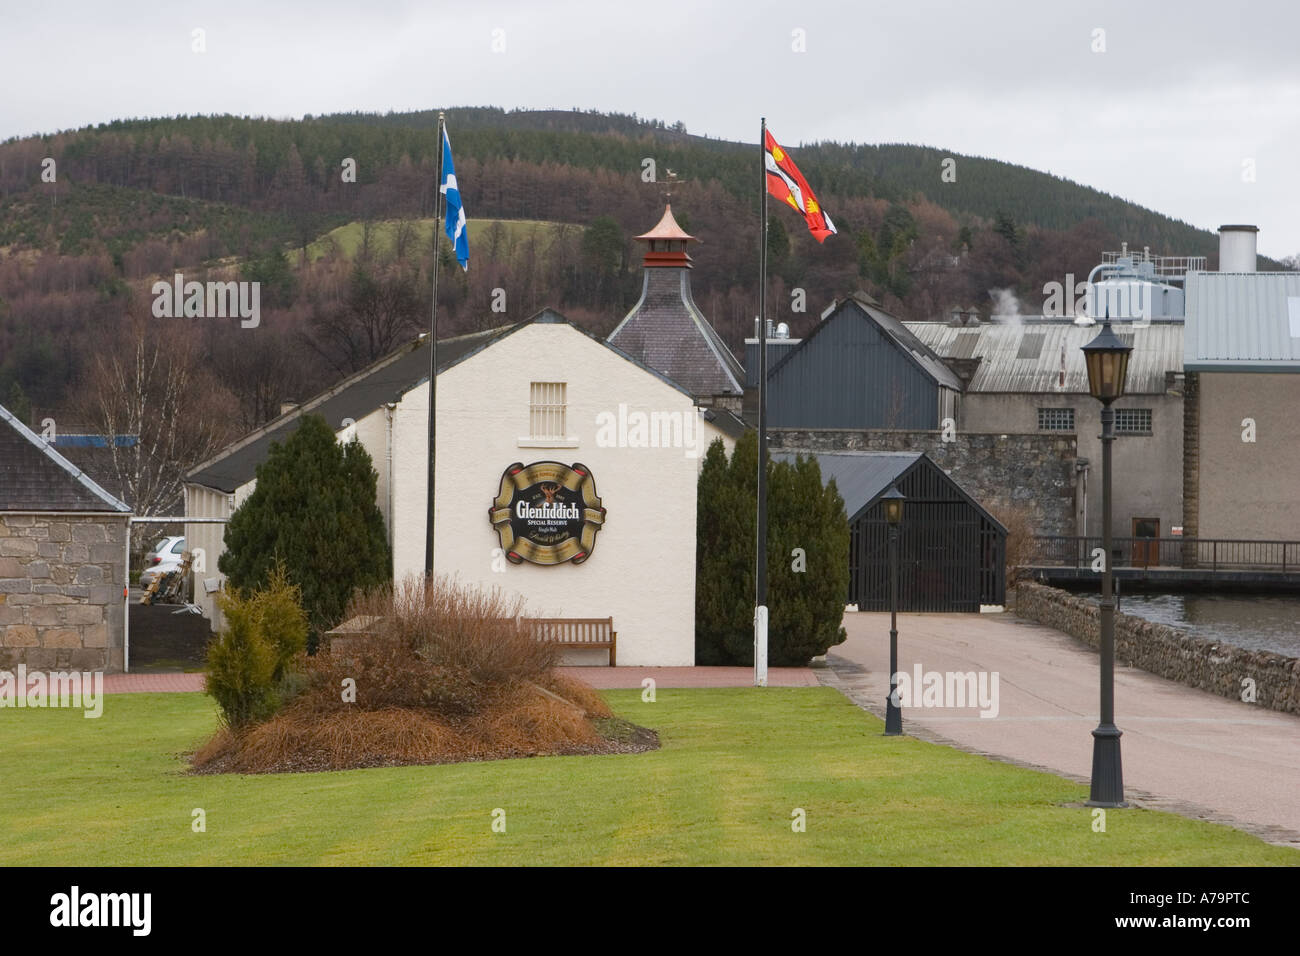 The Glenfiddich whisky Distillery, buildings & grounds, Dufftown Scotland UK Stock Photo